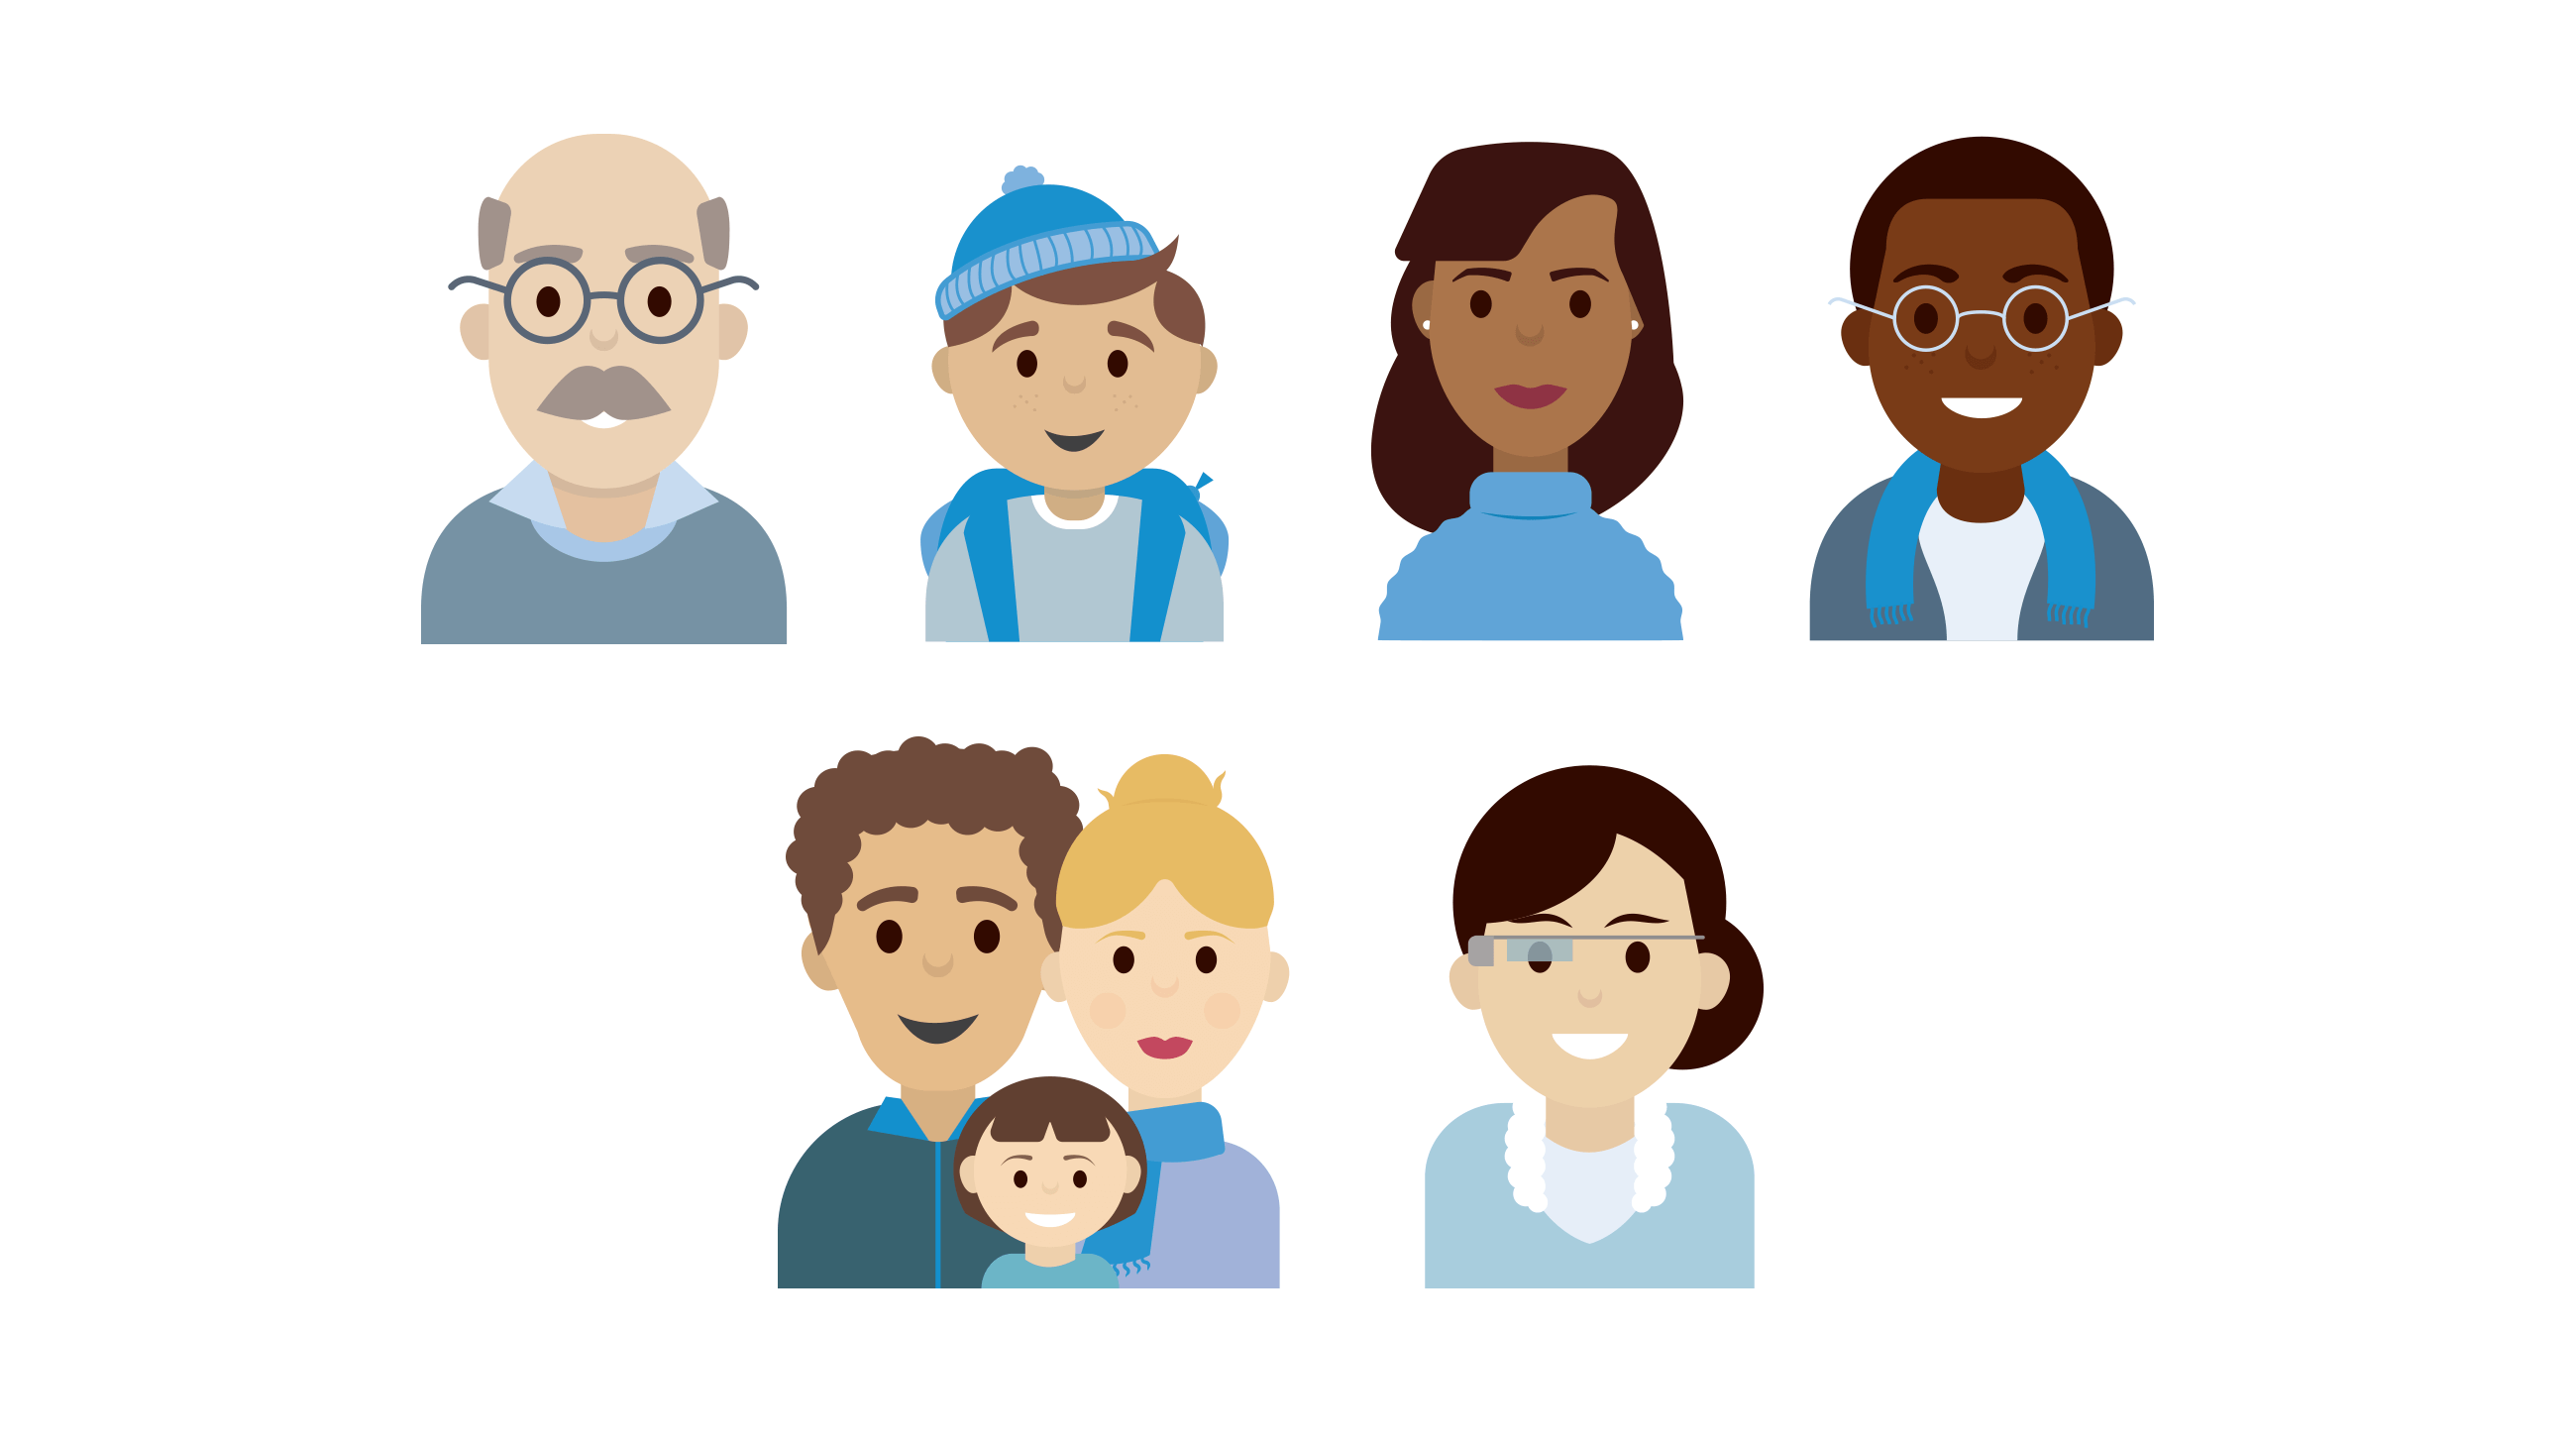 Character illustrations for Google Chromebook campaign